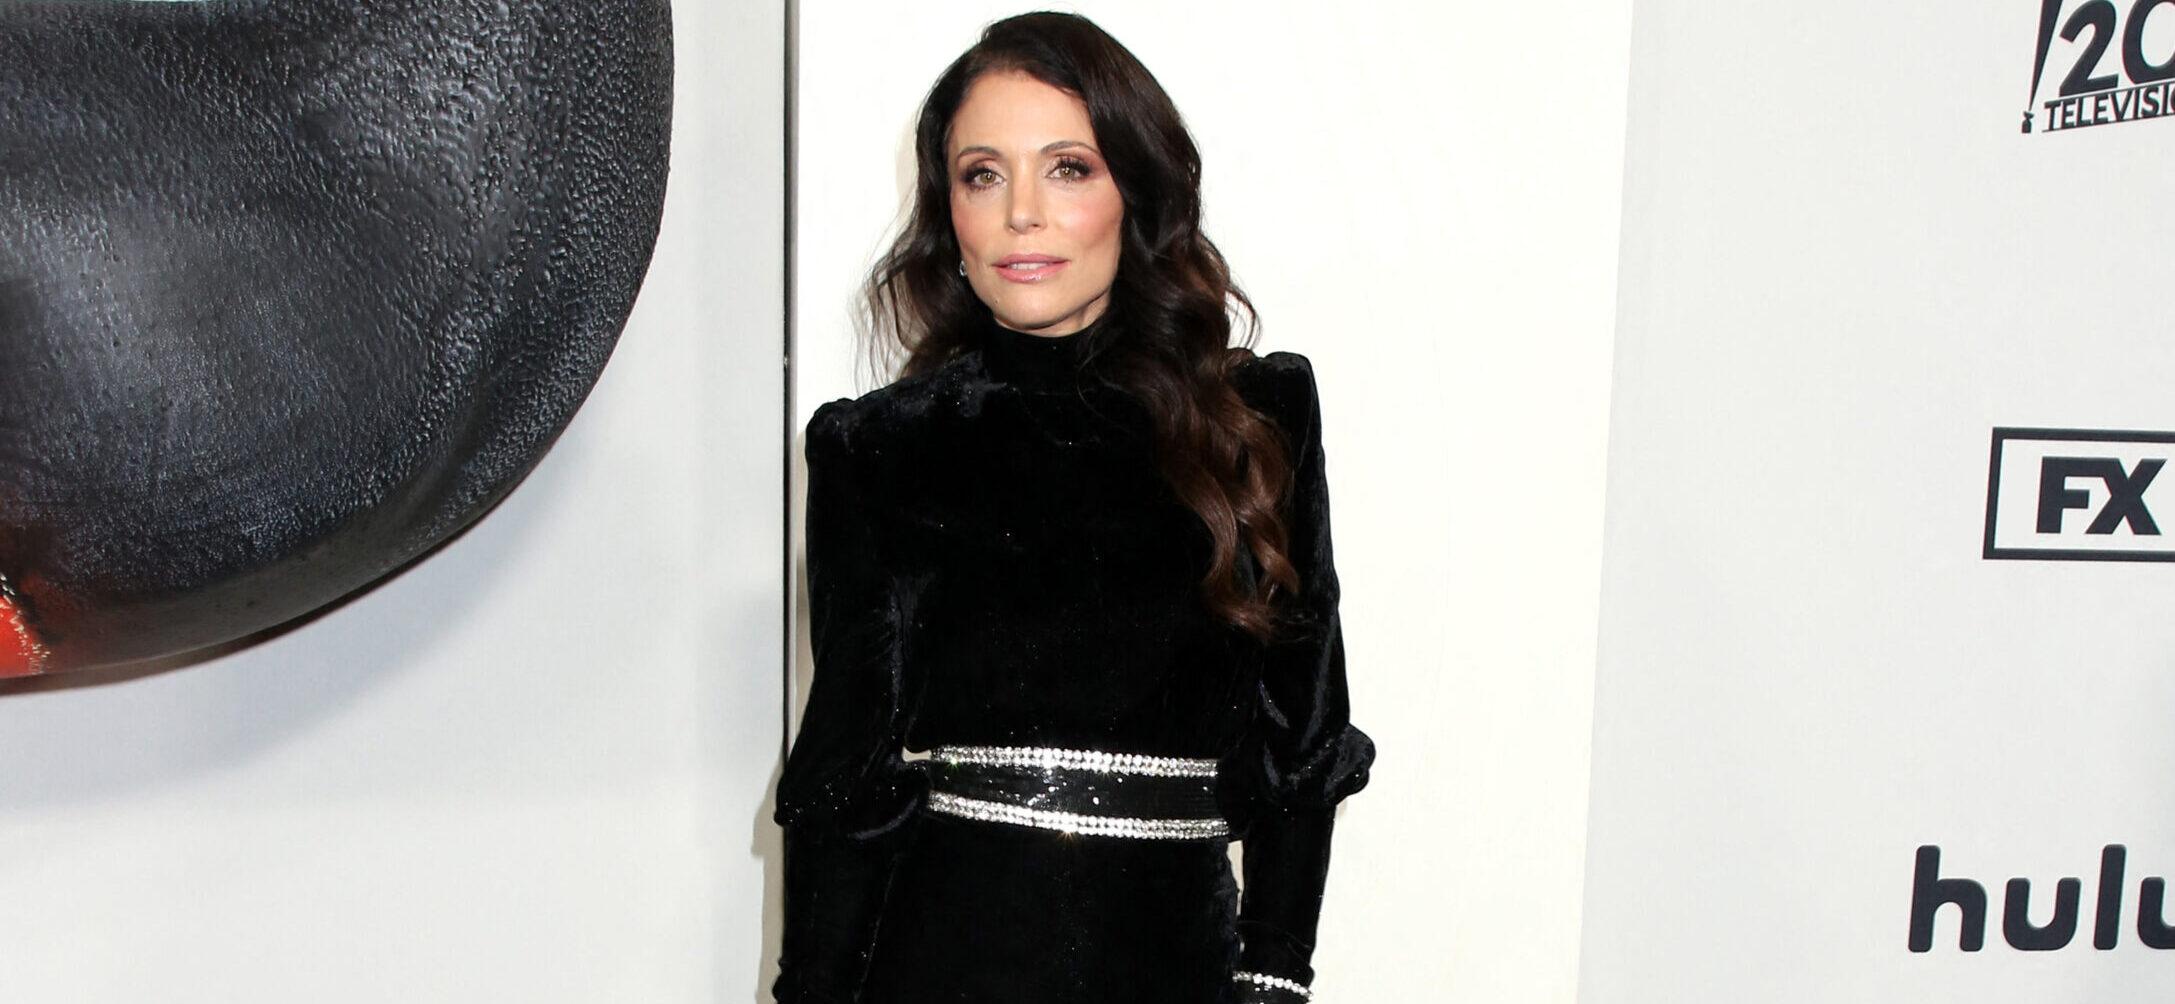 Bethenny Frankel Stopped Looking For A NYC Apartment After Being Punched